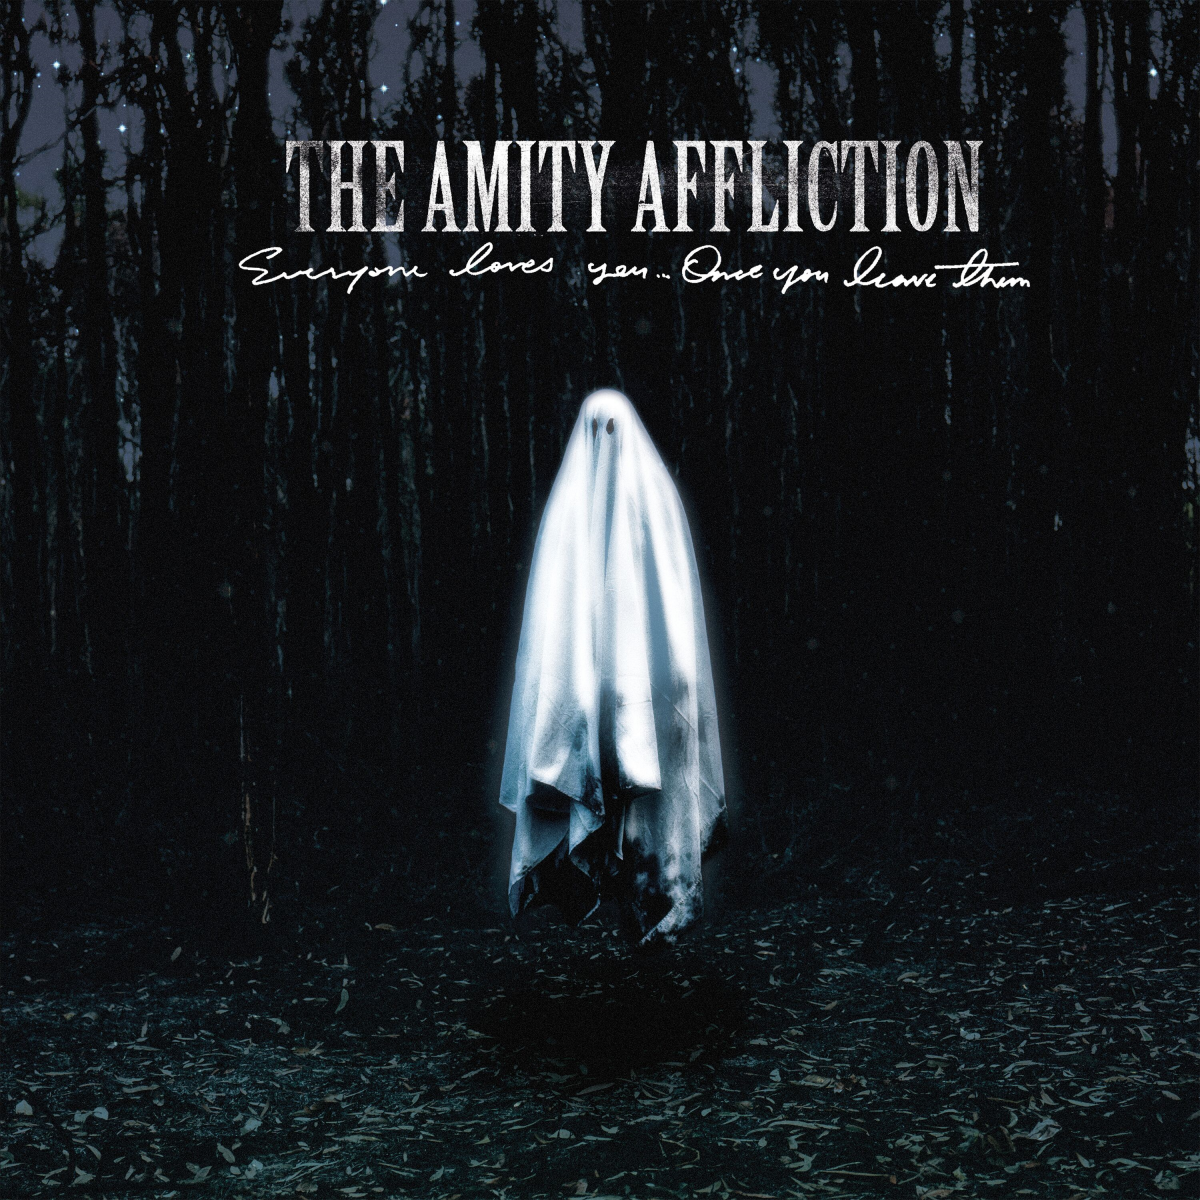 the-amity-affliction-everyone-loves-you-once-you-leave-them-ein-knaller-album-review